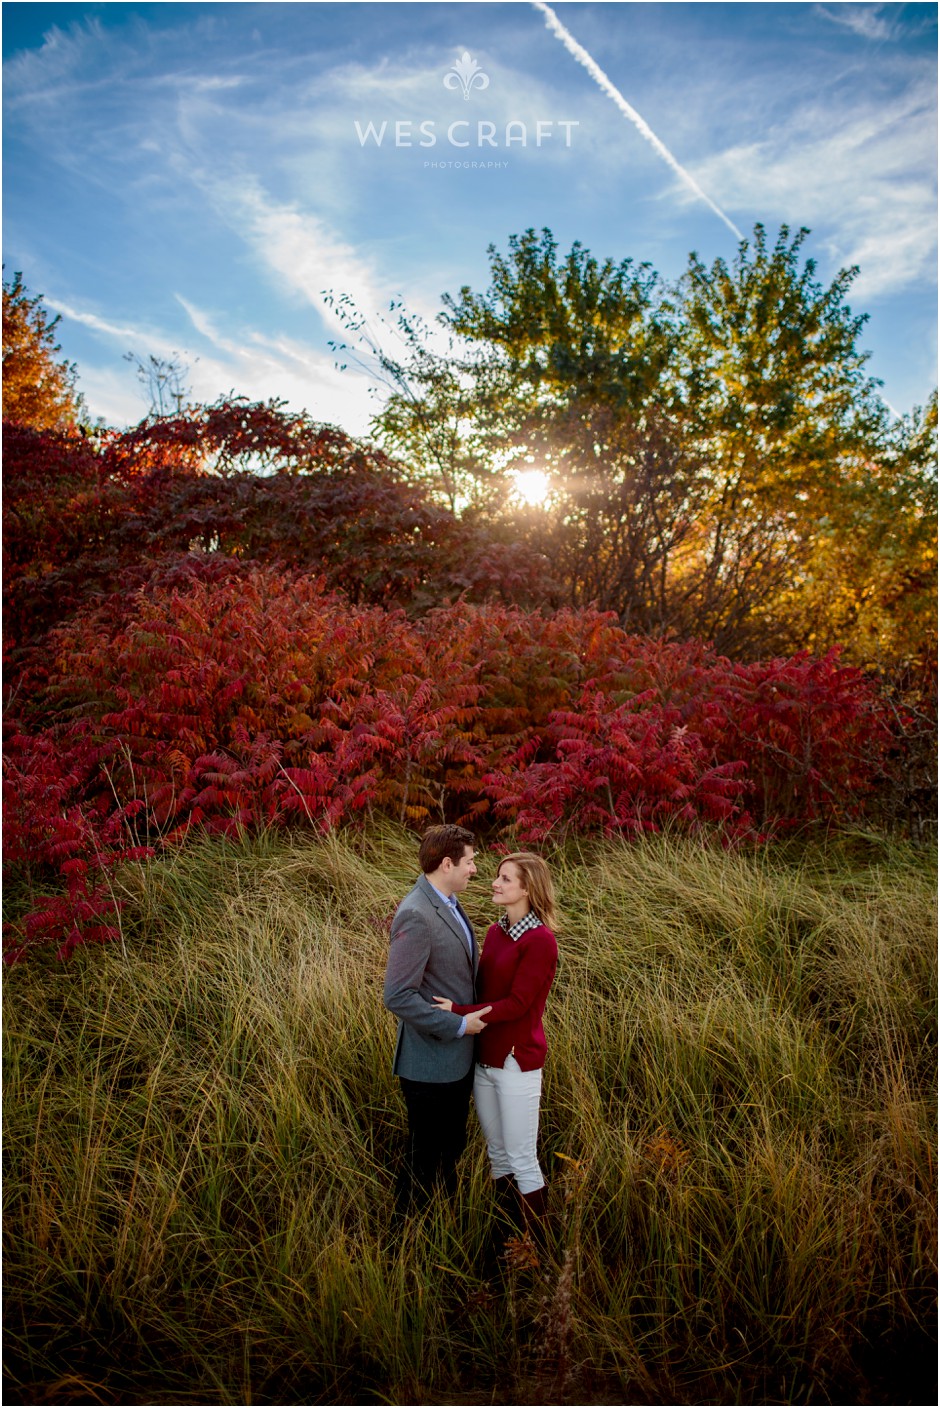 Natural Fall Setting Chicago Engagement Wes Craft Photography006